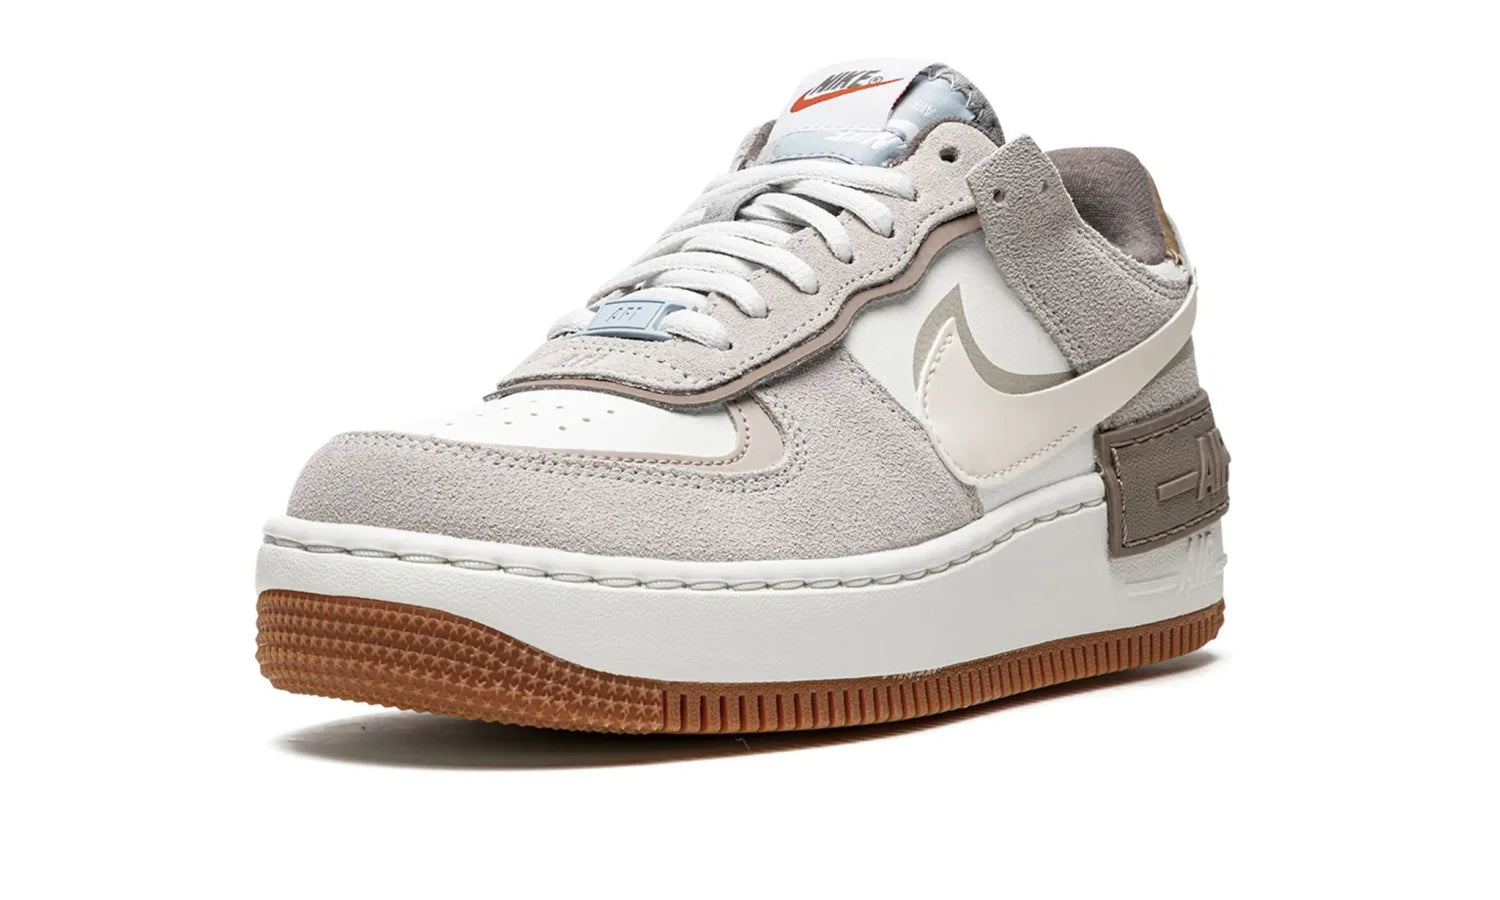 Nike Air Force 1 Low Shadow Sail Pale Ivory (Women's)